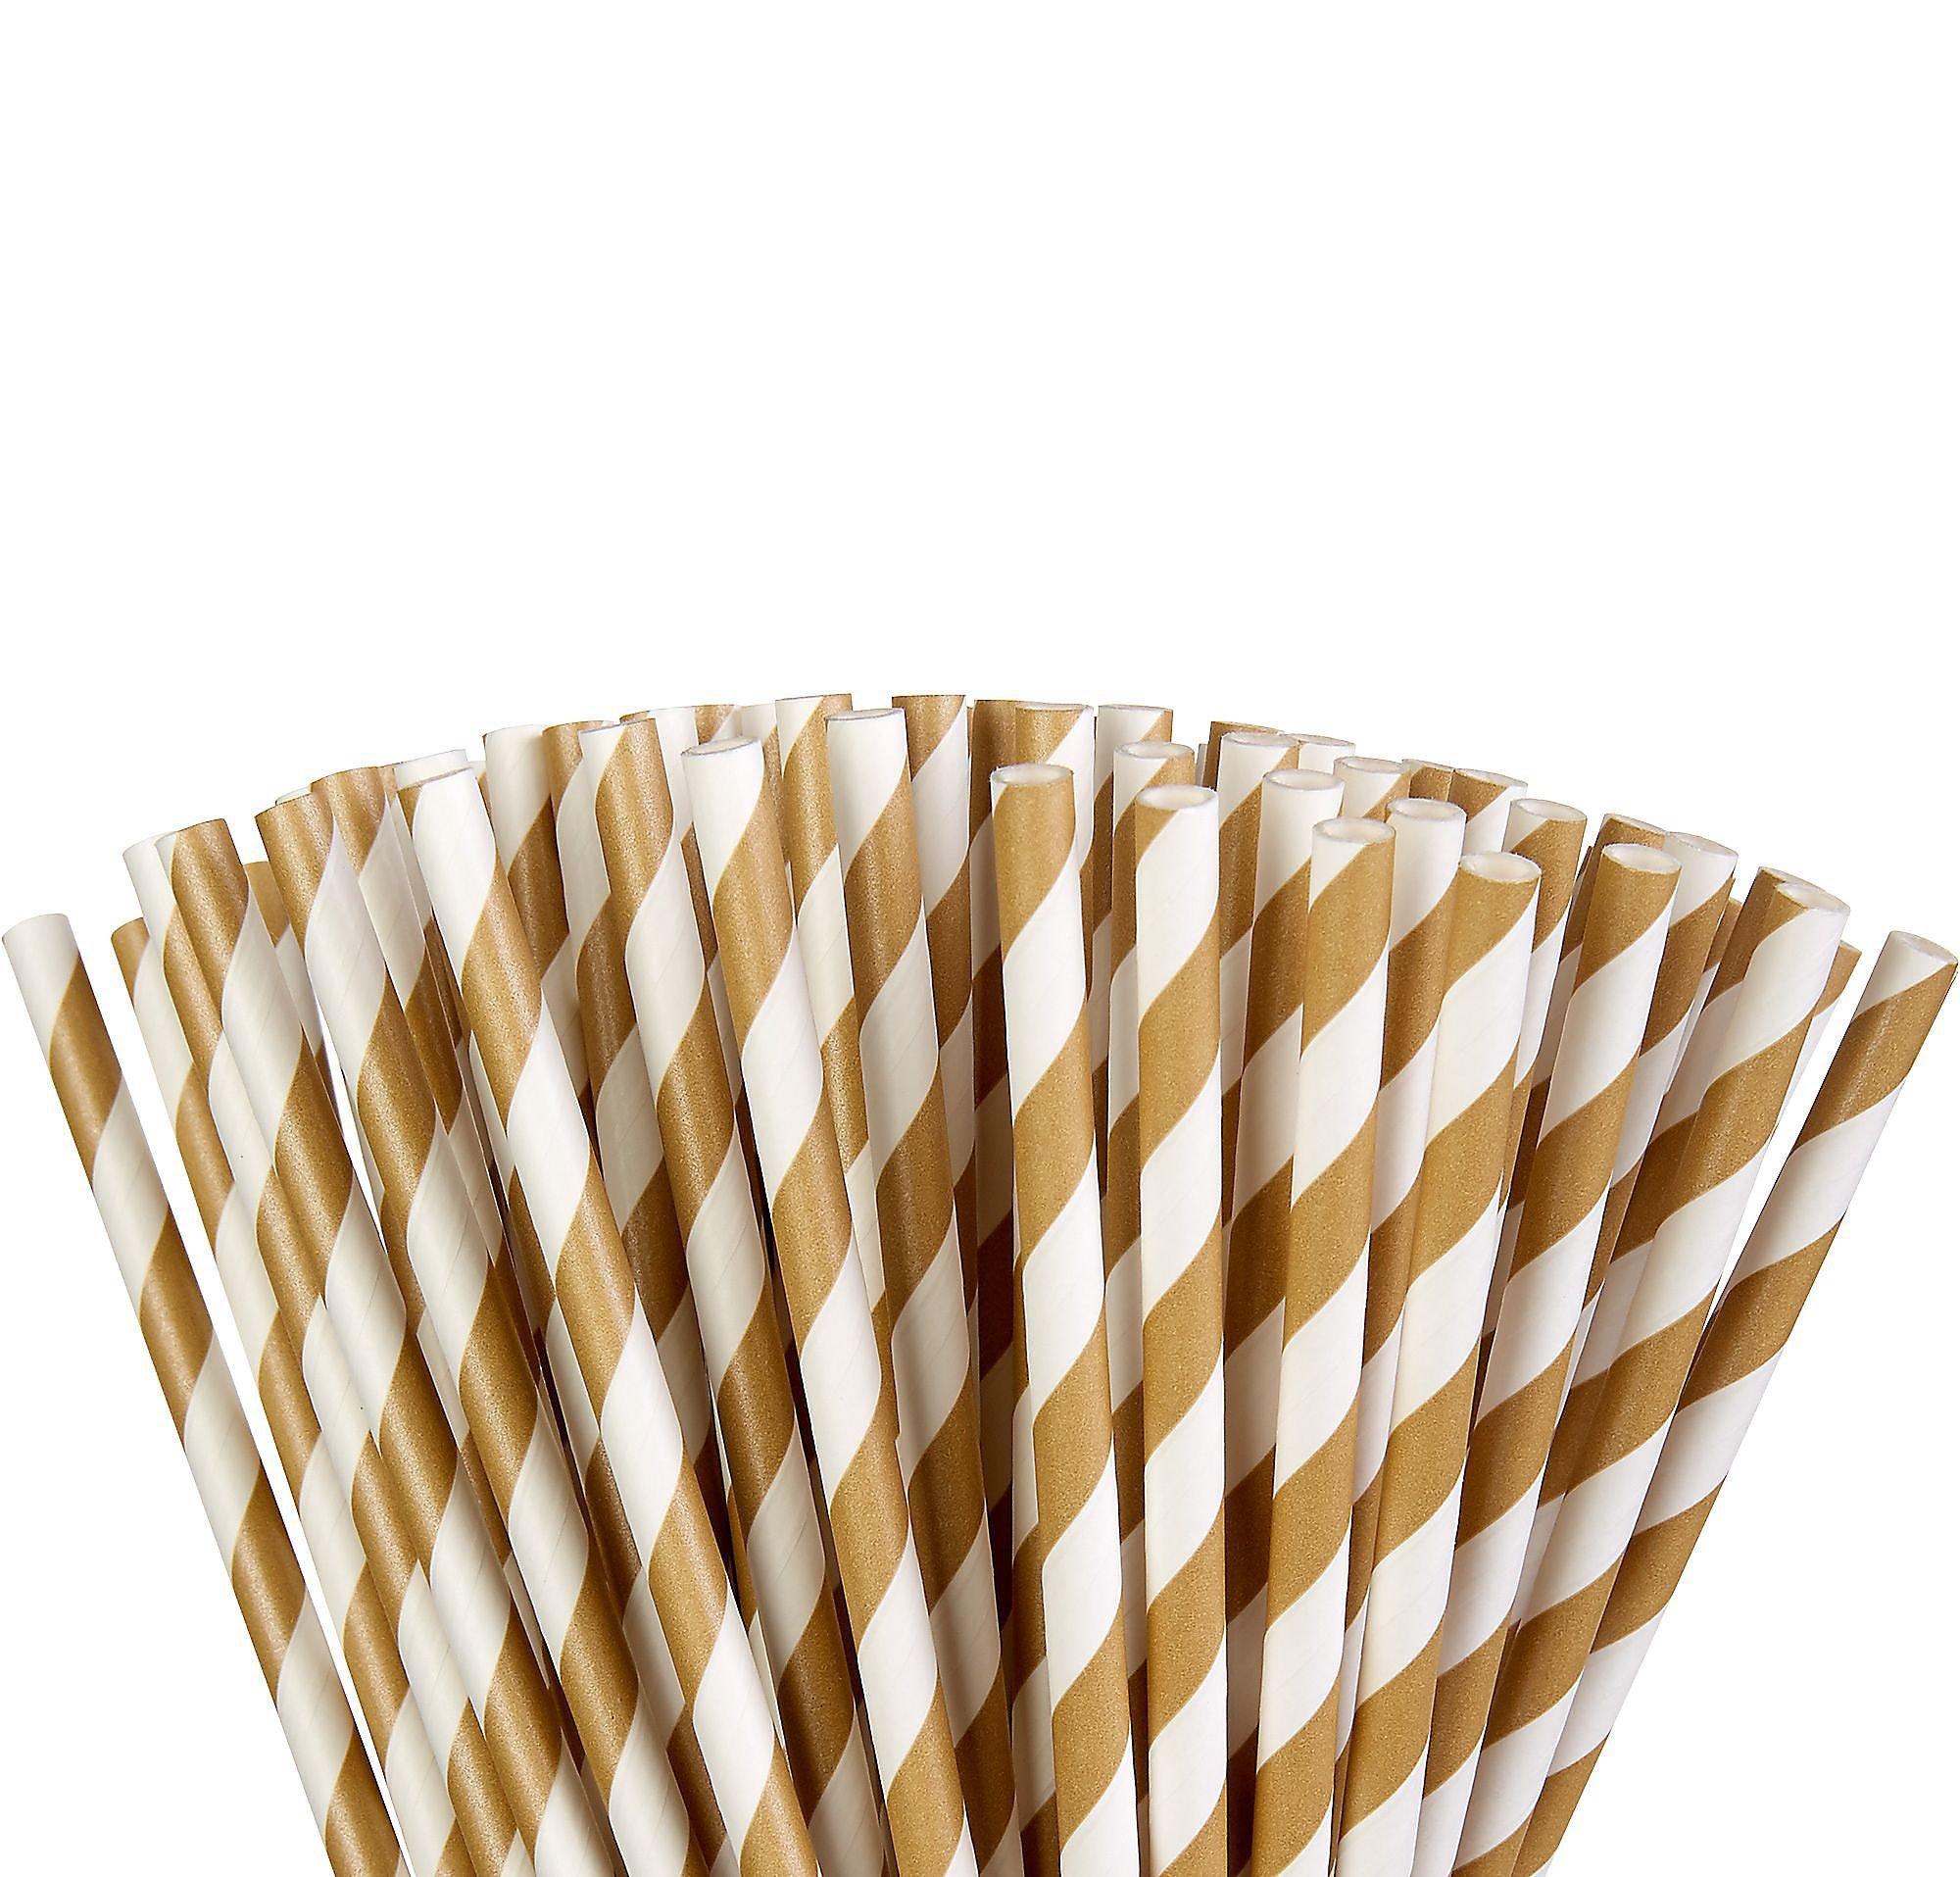 Gold Star Party Straws (Set of 25)